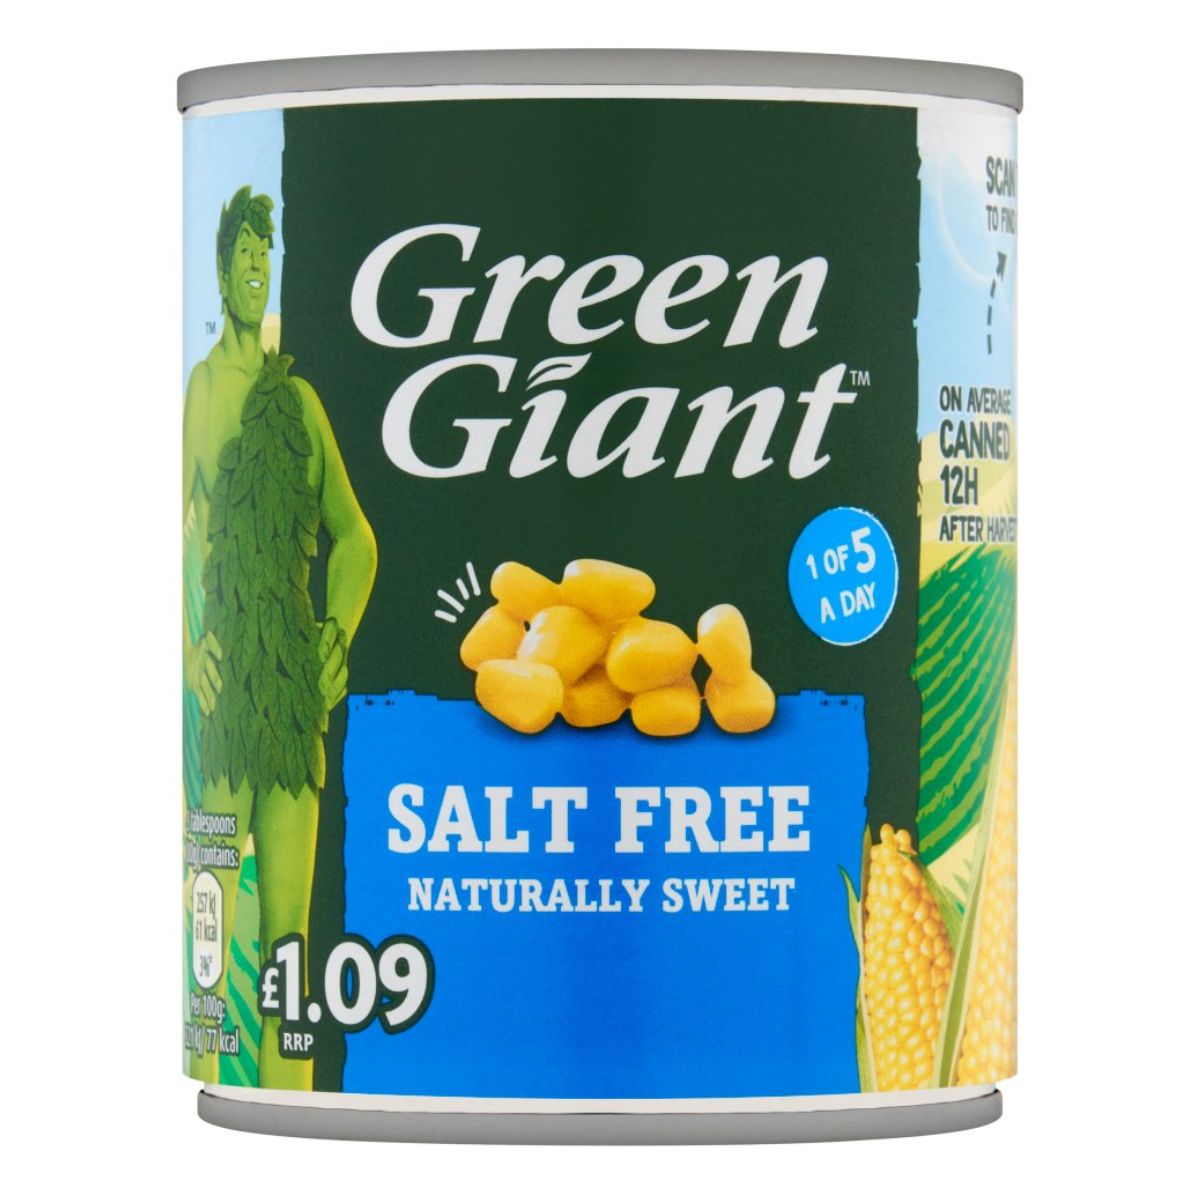 A can of Green Giant - Salt Free Corn - 198g.